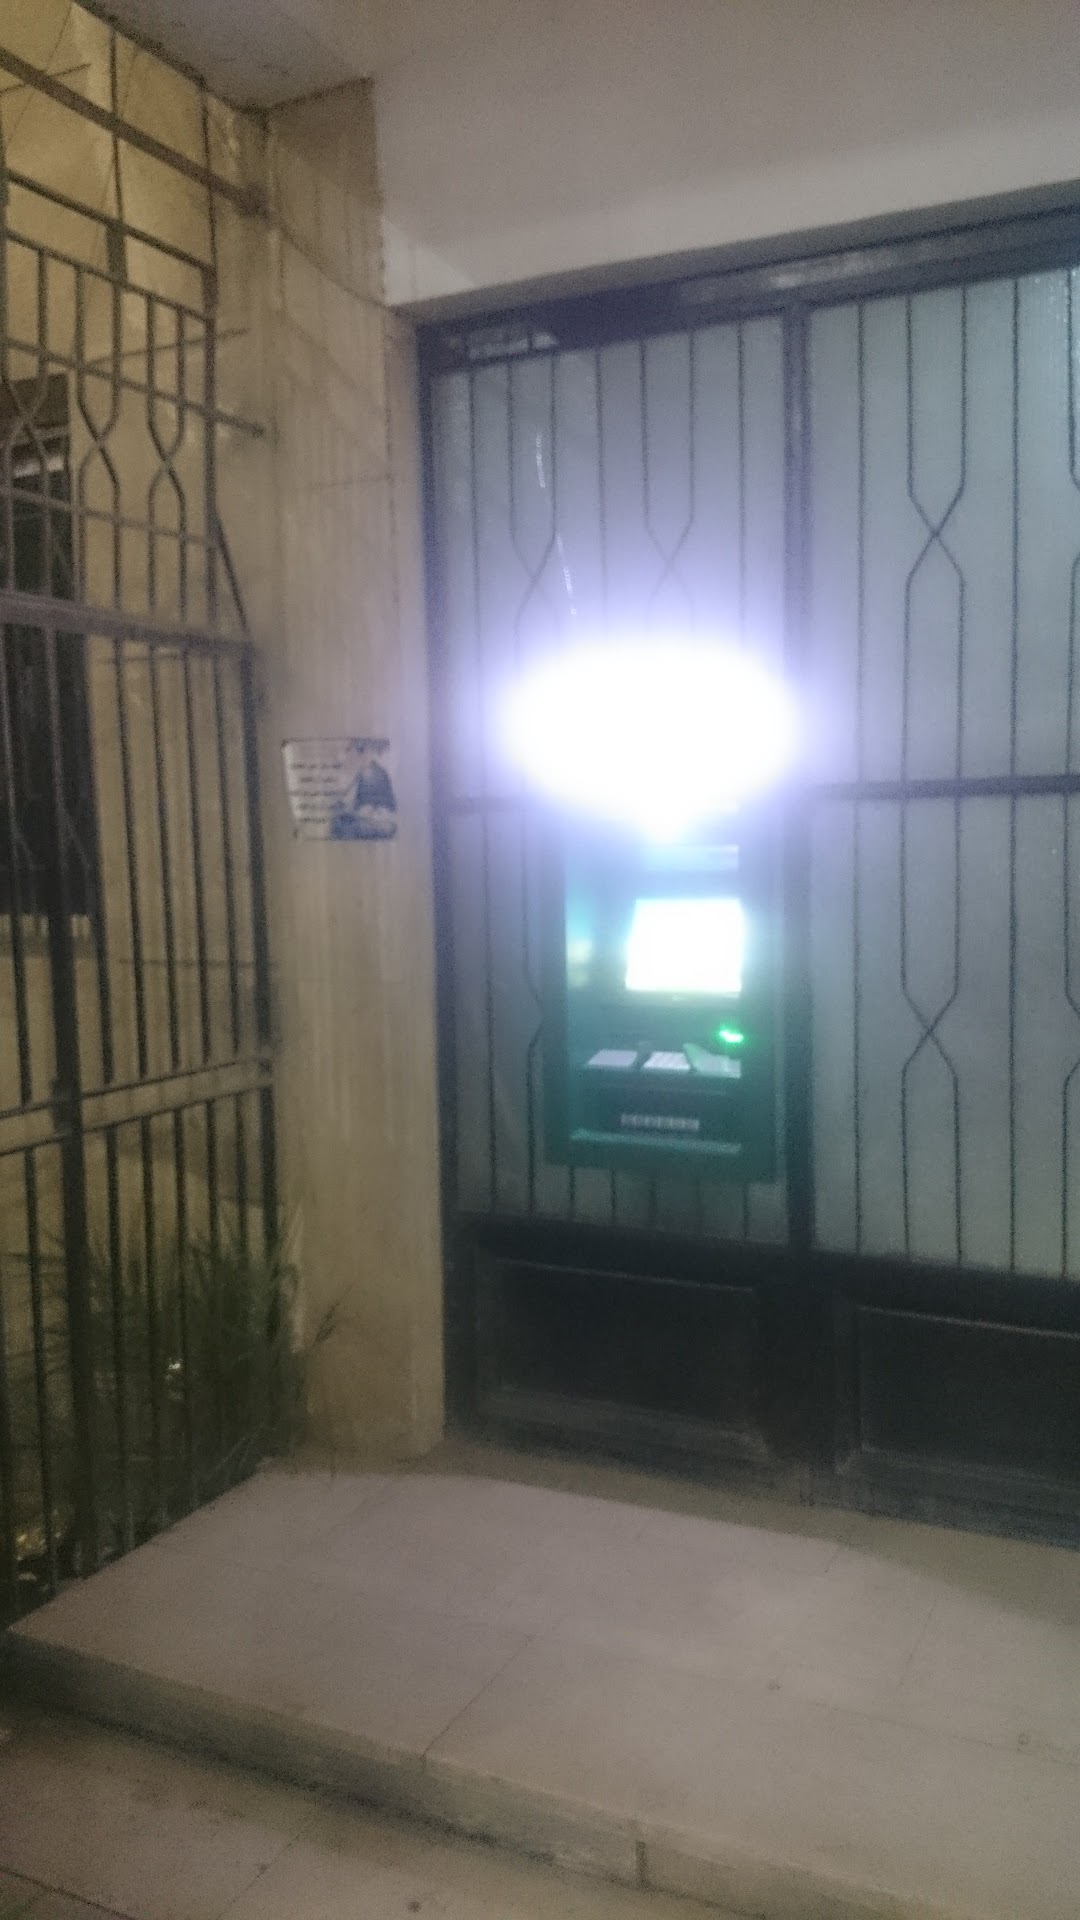 ATMs National Bank of Egypt